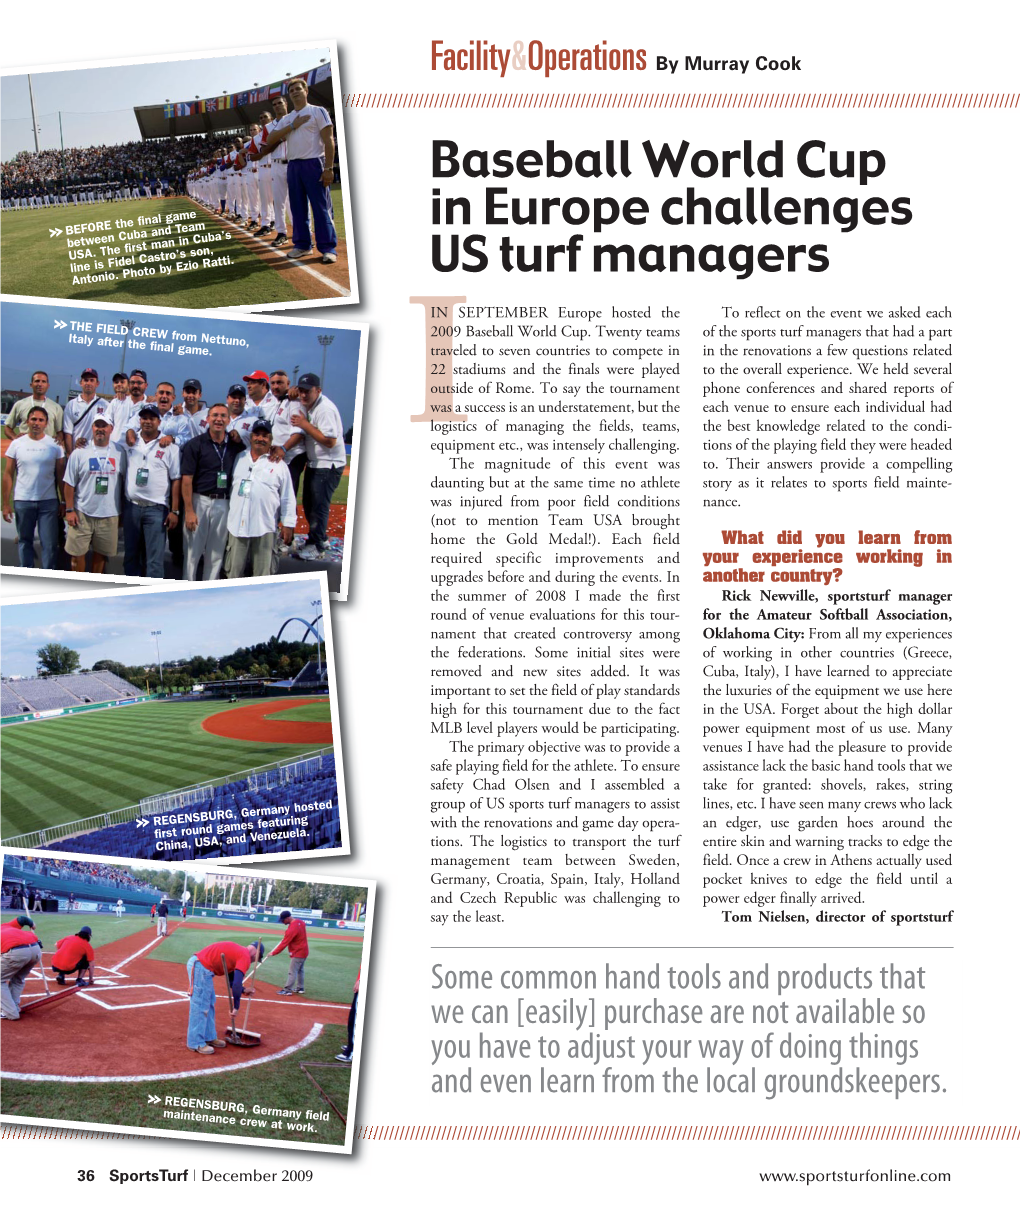 Baseball World Cup in Europe Challenges US Turf